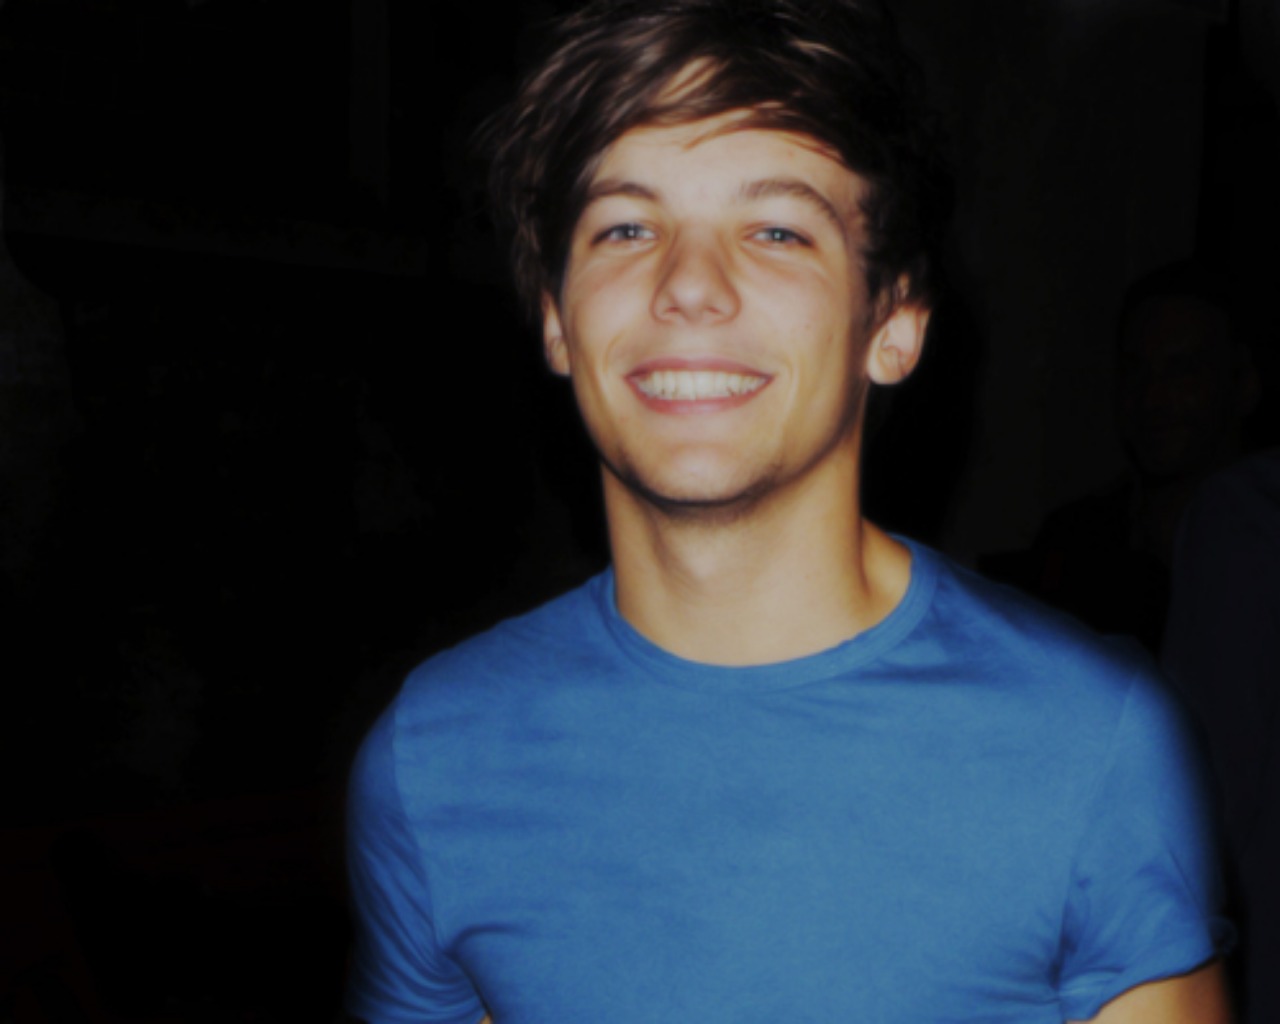 Louis♥ - Nathan Sykes And Louis Tomlinson - 1280x1024 Wallpaper 